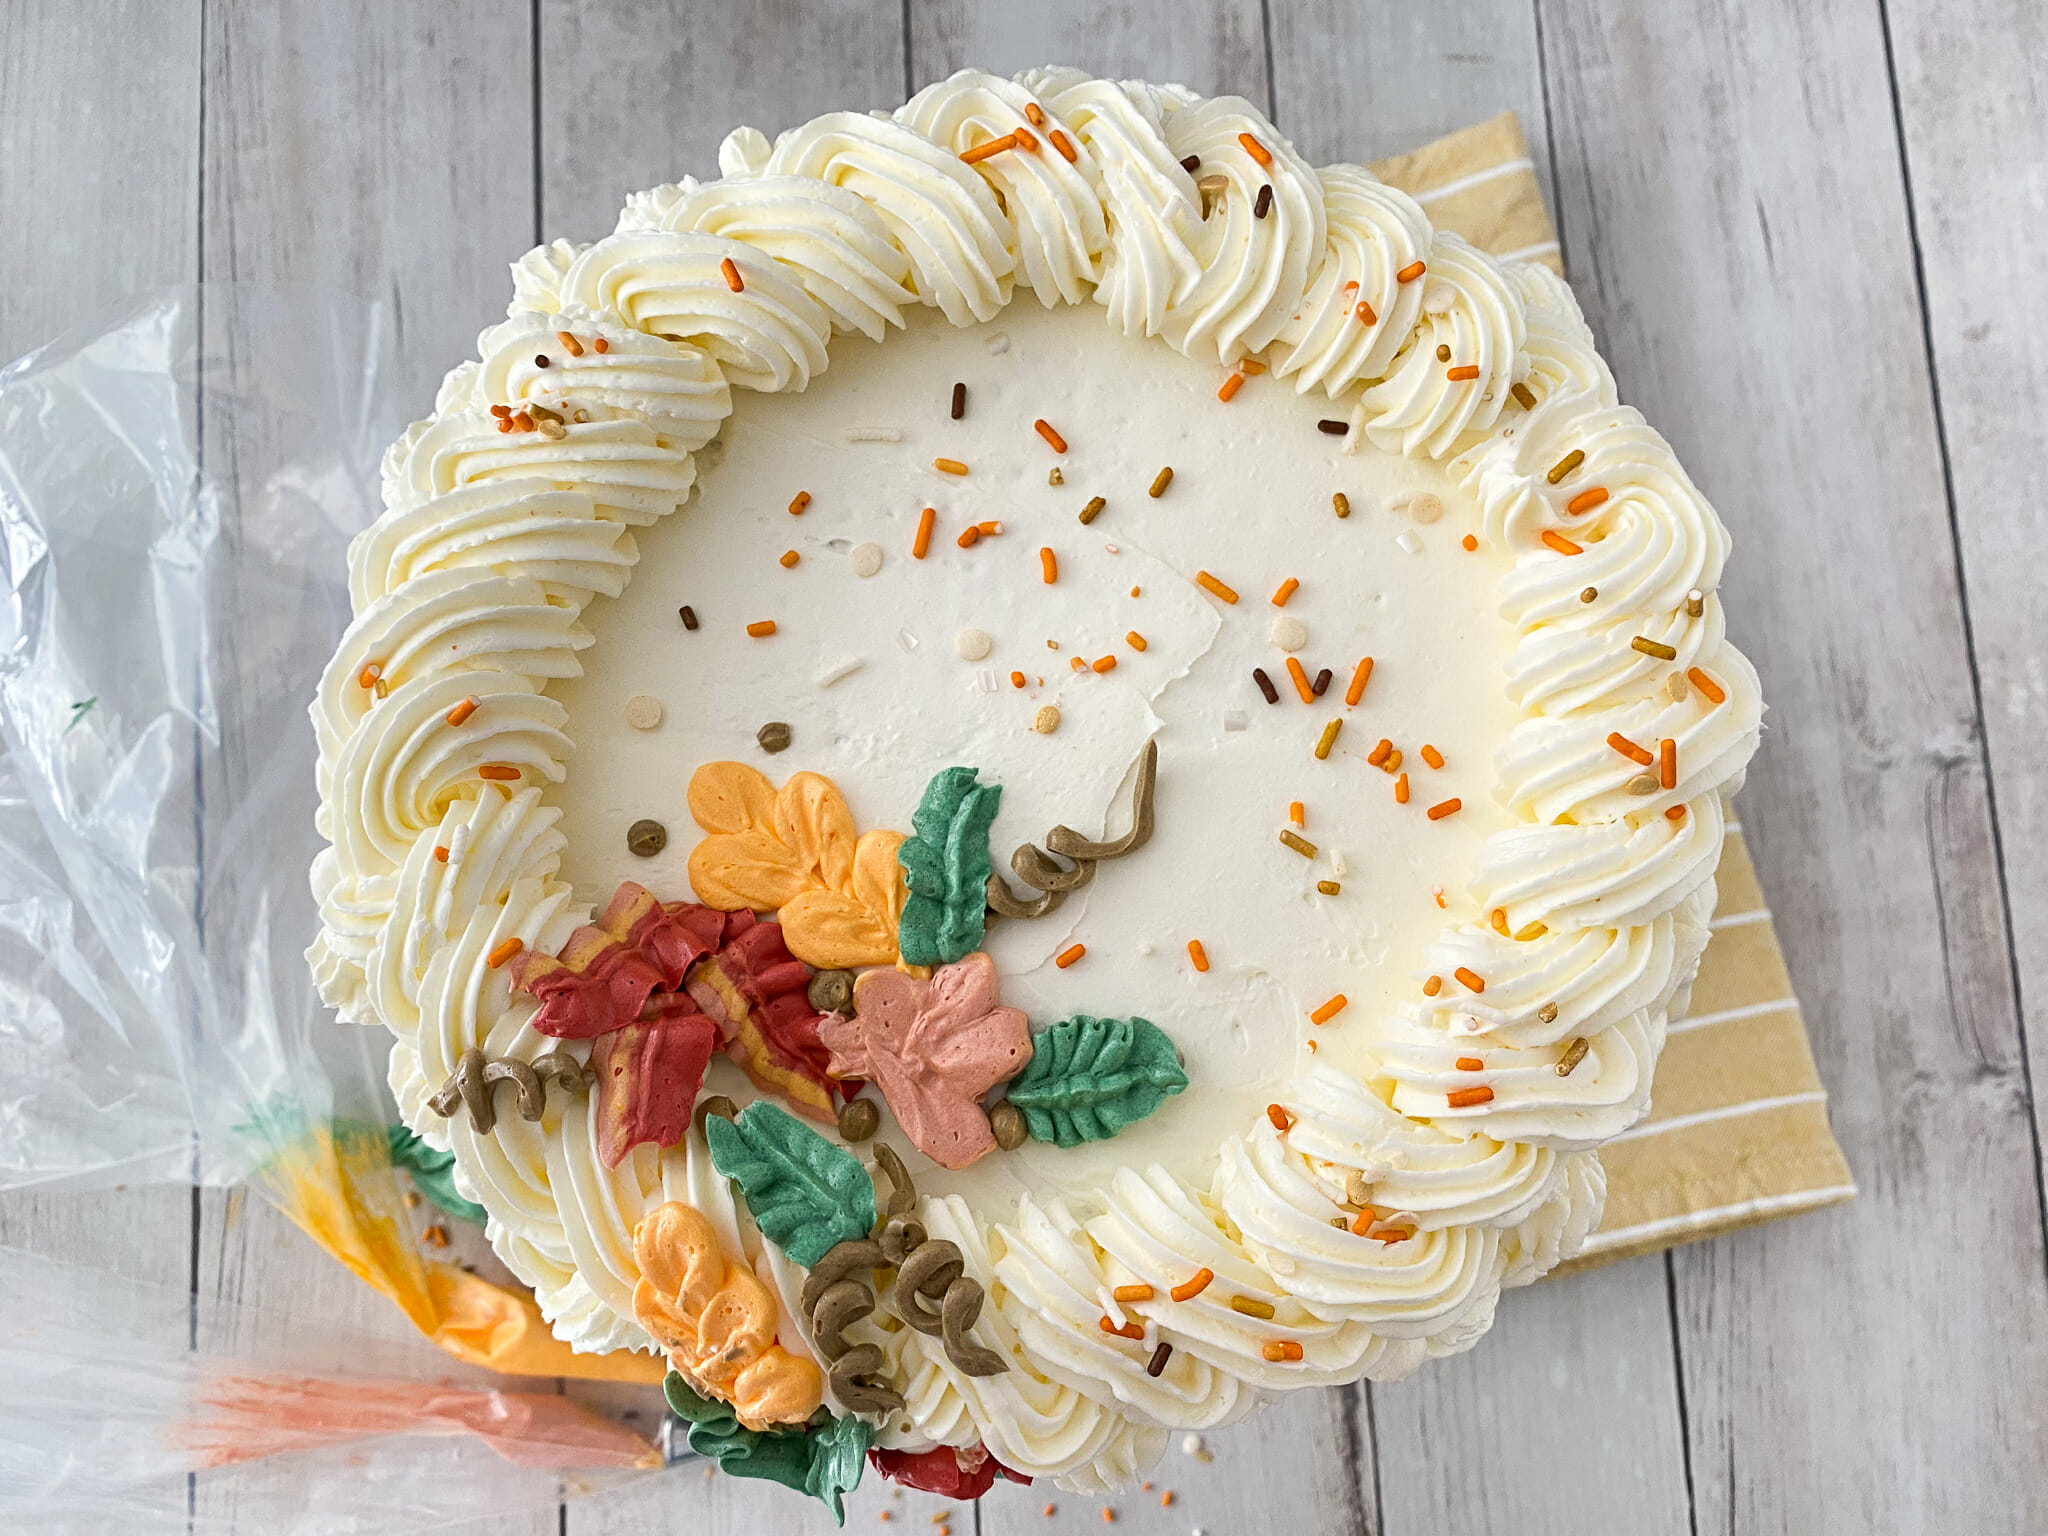 Vanilla-Frosted Cake With Fall Leaves